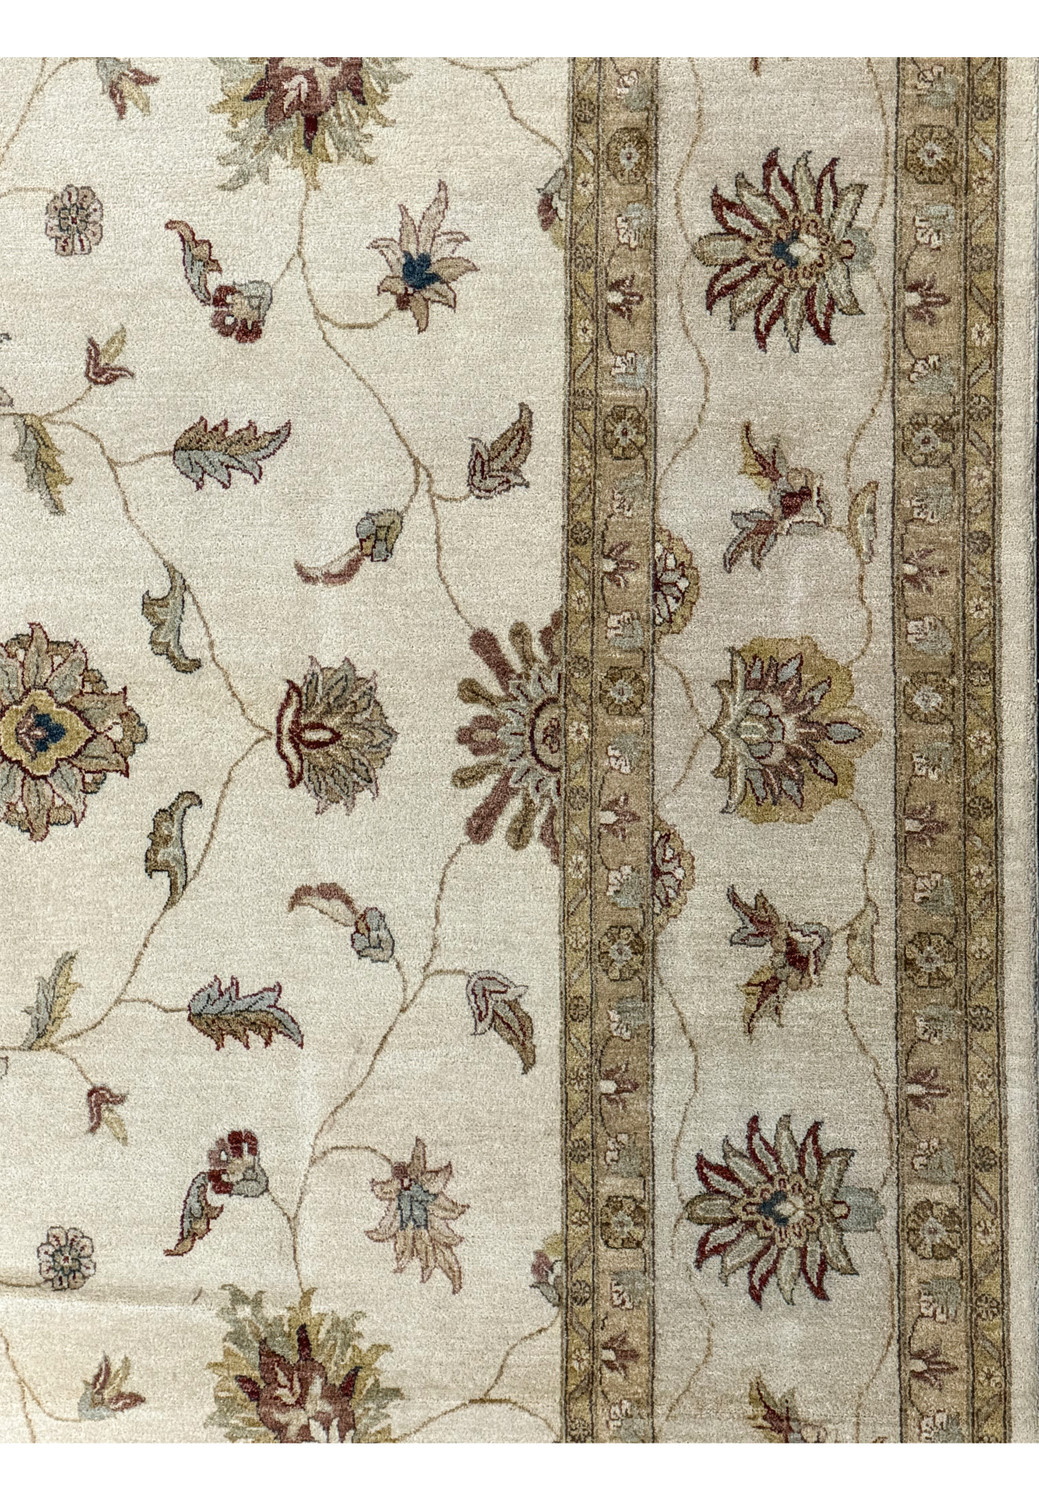 Close-up of the border detail highlighting the rug's intricate edging and color palette.